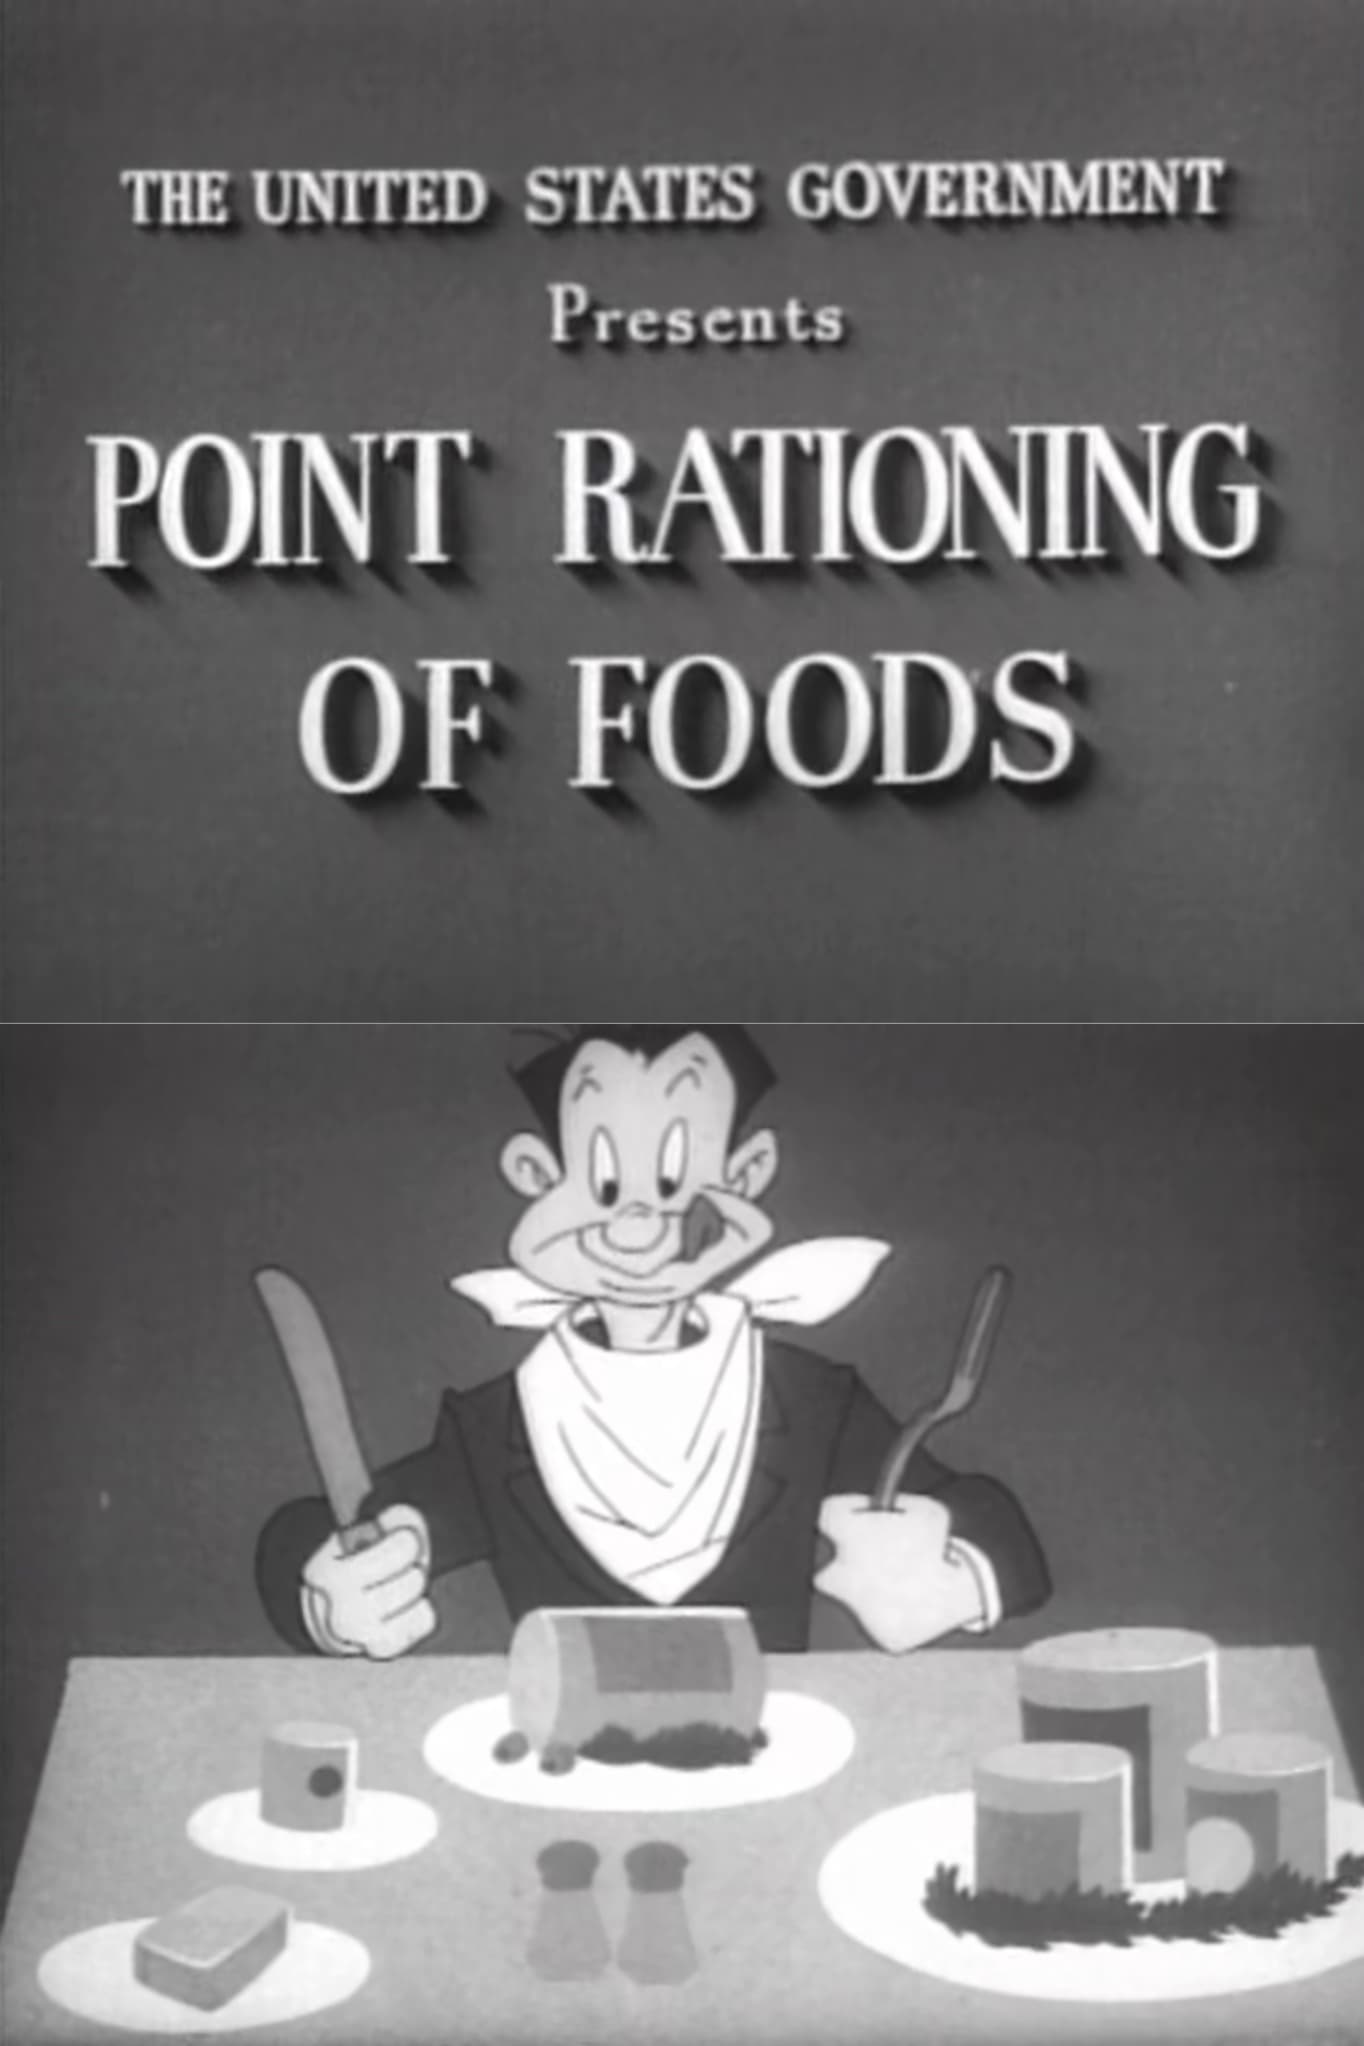 Point Rationing of Foods